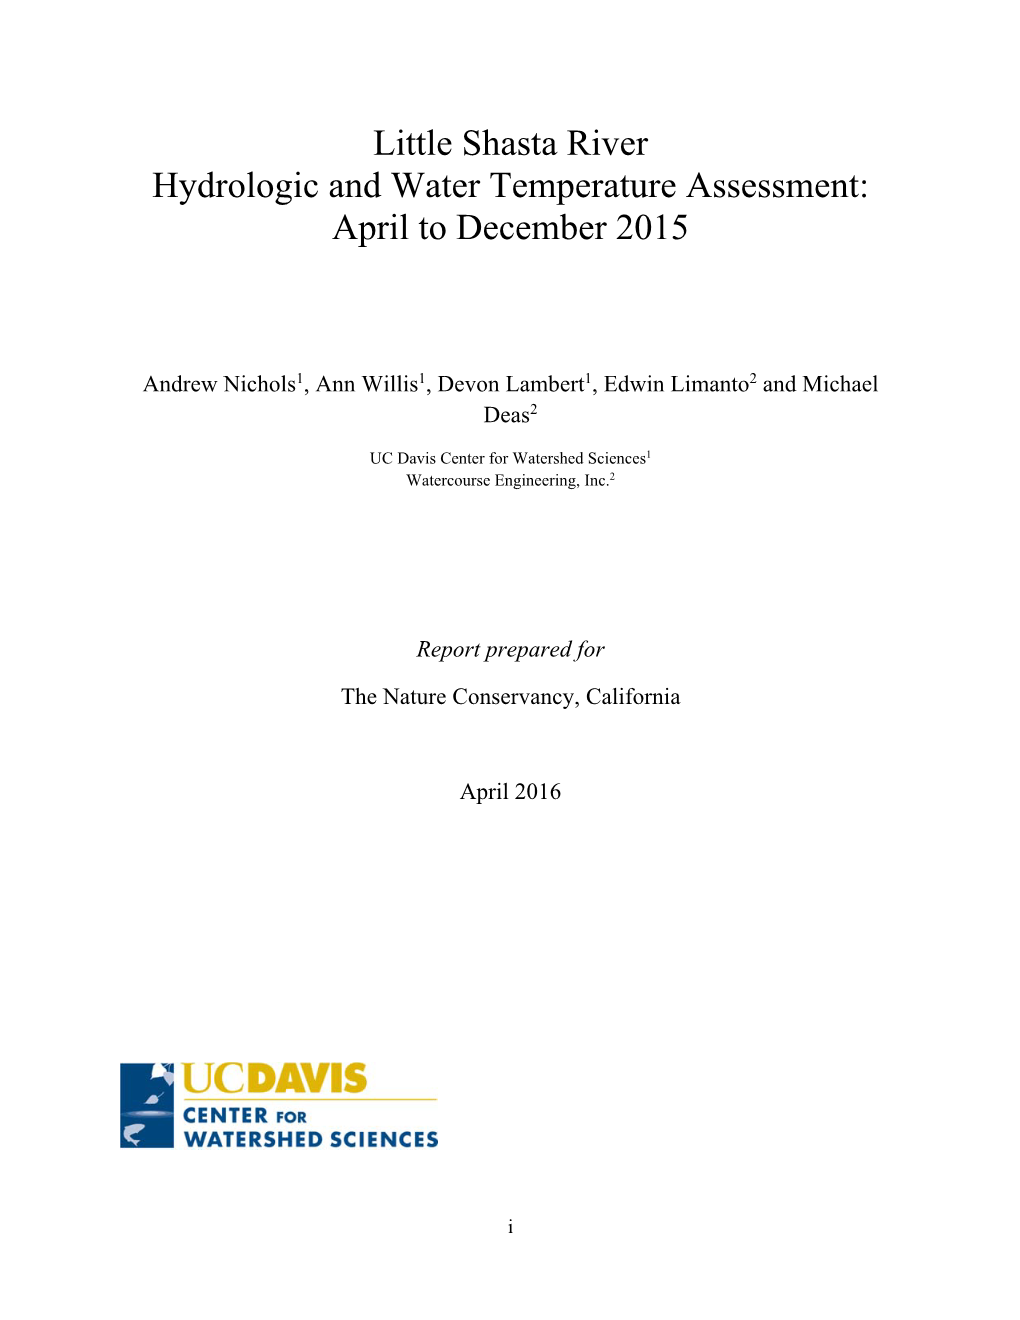 Little Shasta River Hydrologic and Water Temperature Assessment: April to December 2015